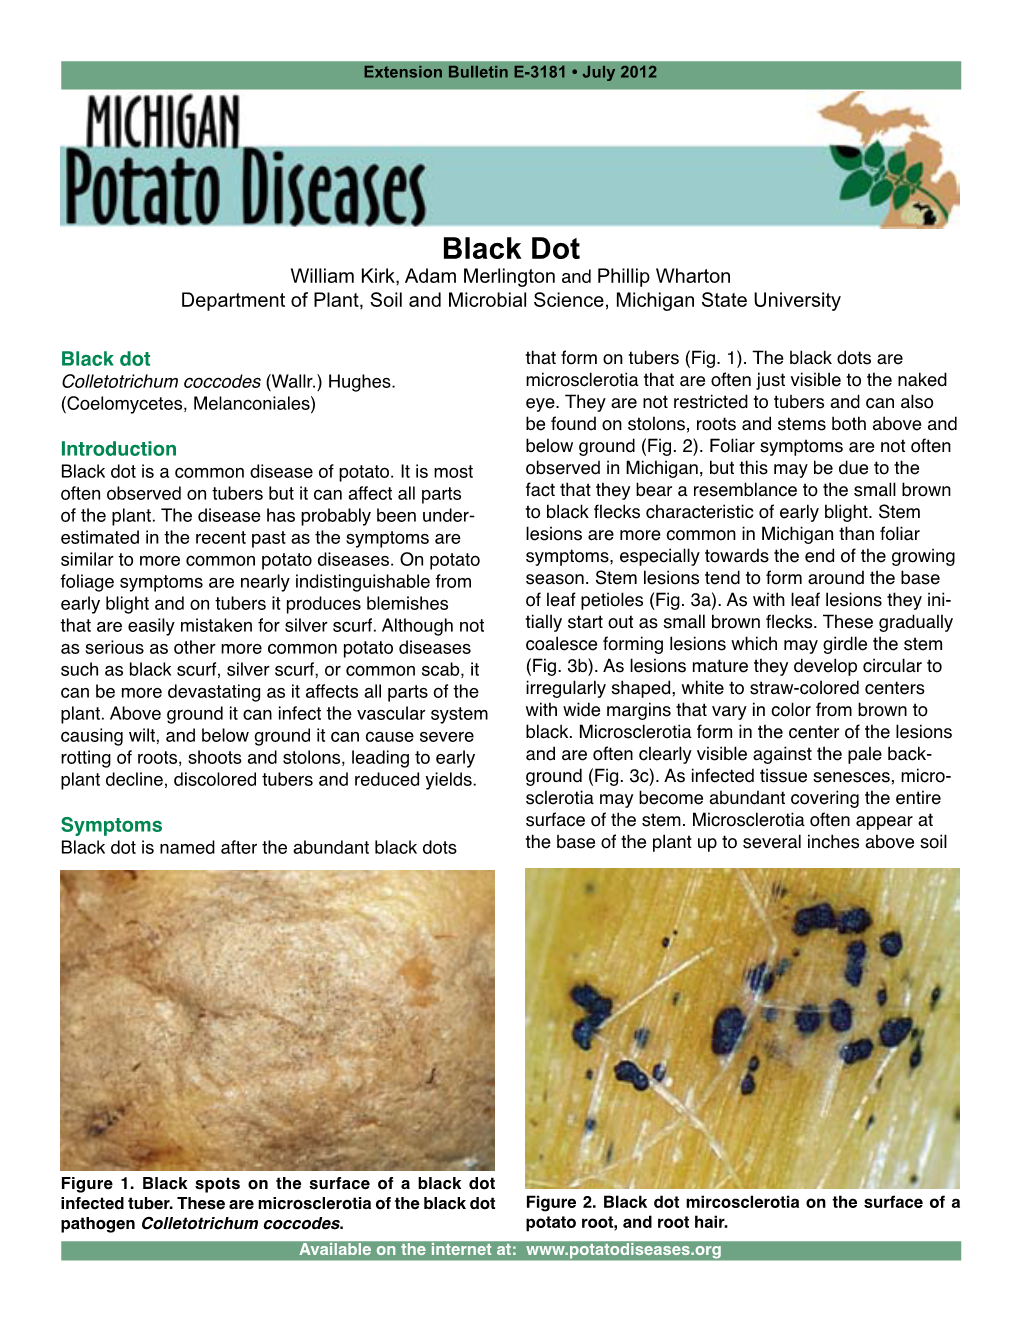 Black Dot William Kirk, Adam Merlington and Phillip Wharton Department of Plant, Soil and Microbial Science, Michigan State University